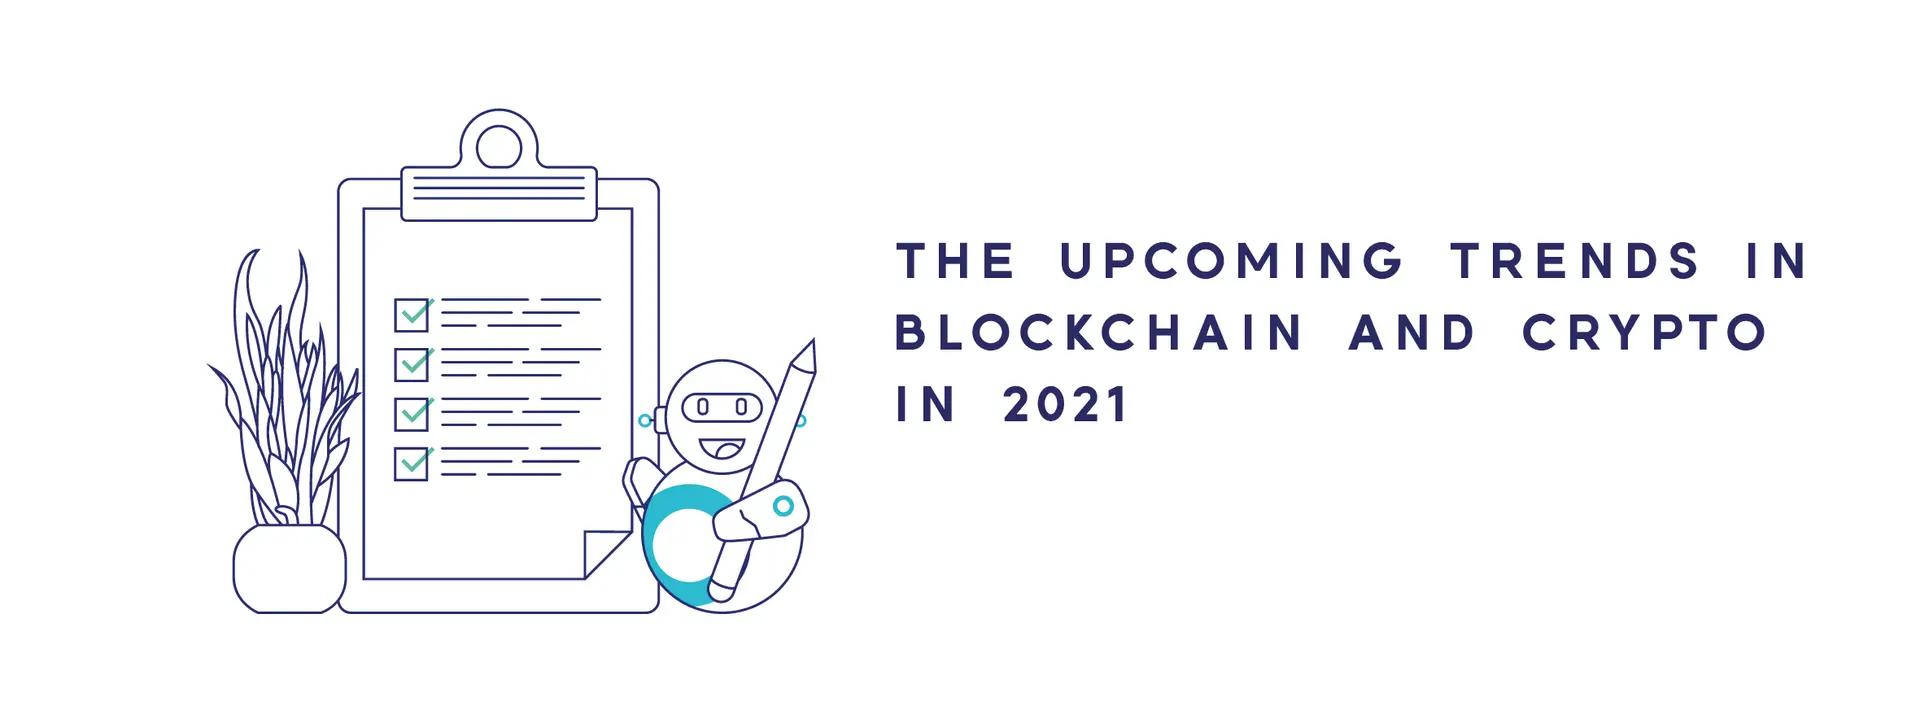 Blockchain Outlook and Crypto Trend Predictions For 2021